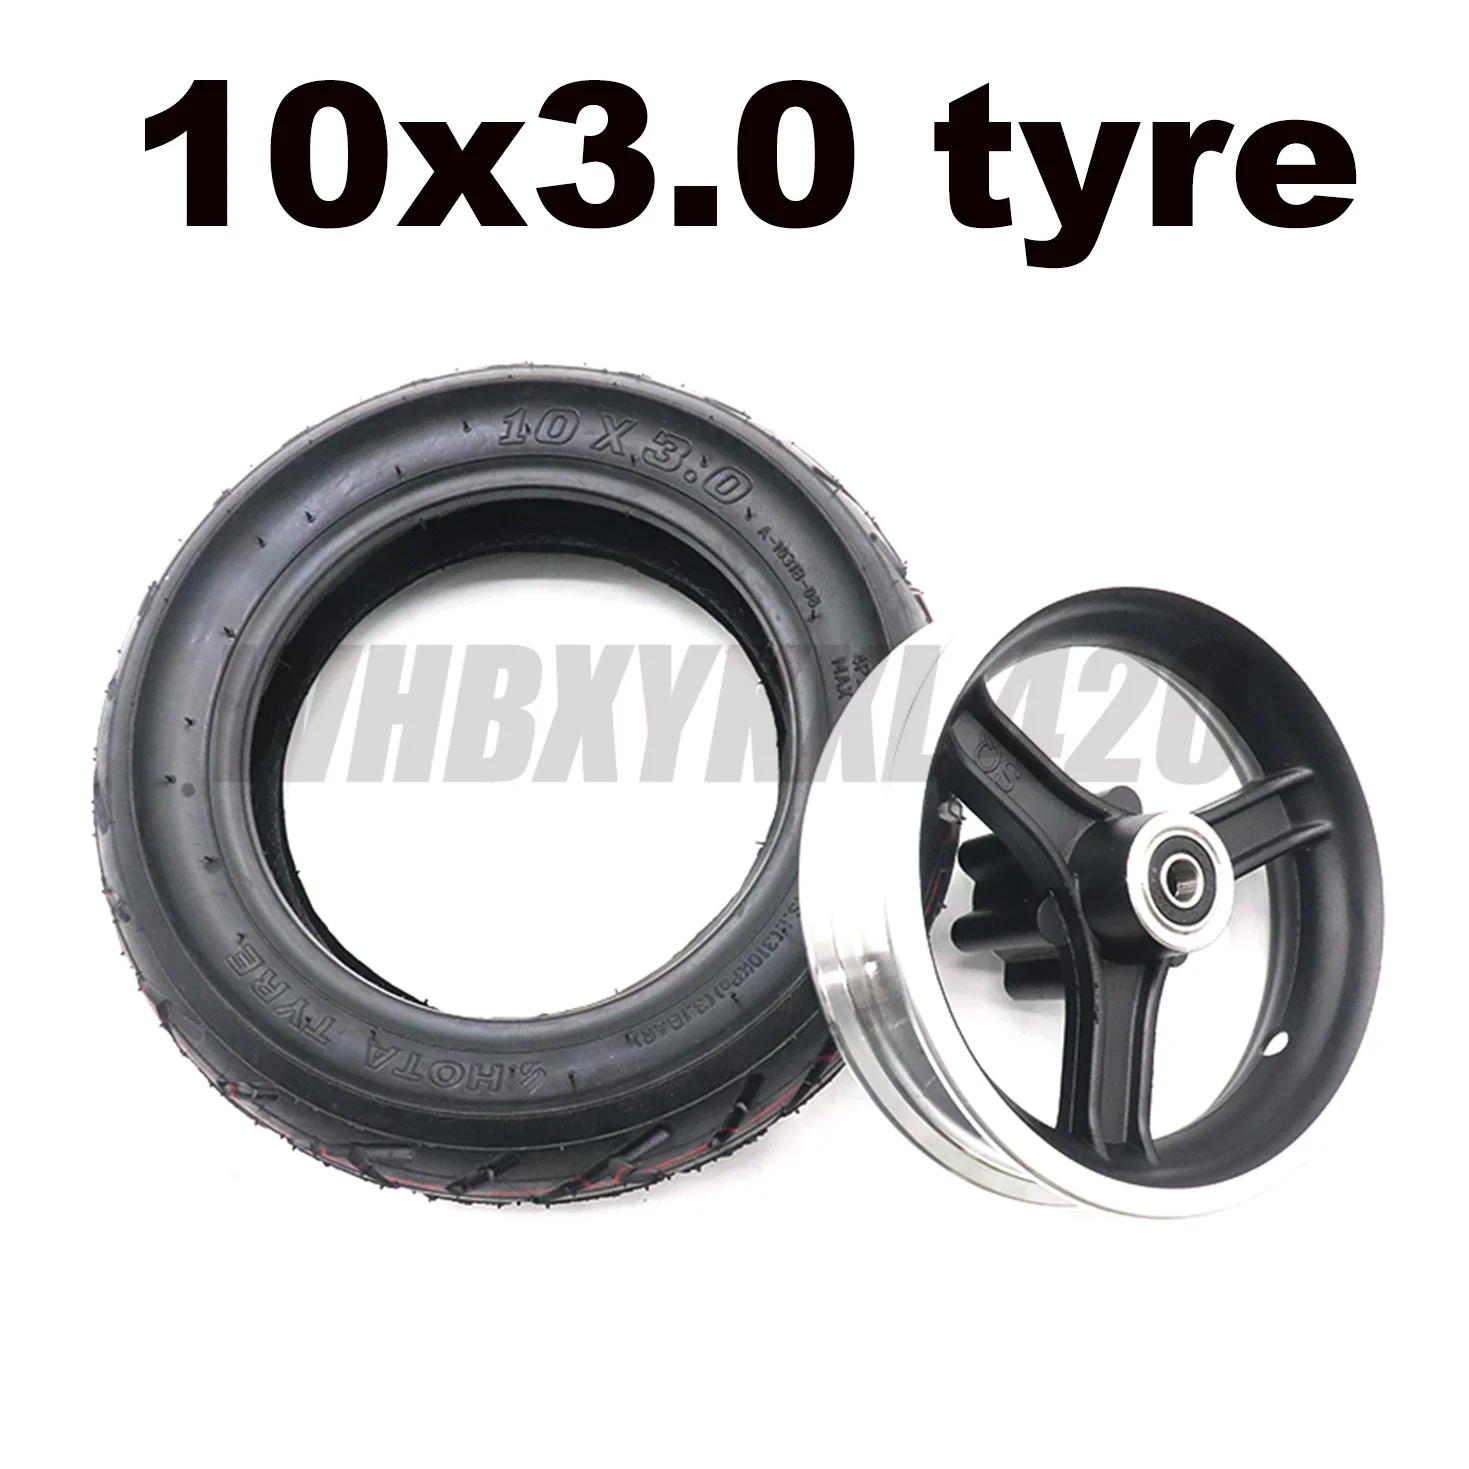 

10 inch HOTA tire 80/65-6 outer tyre tubeless rubber and alloy wheel hub for electric motorcycle scooter 10x3.0 tyre